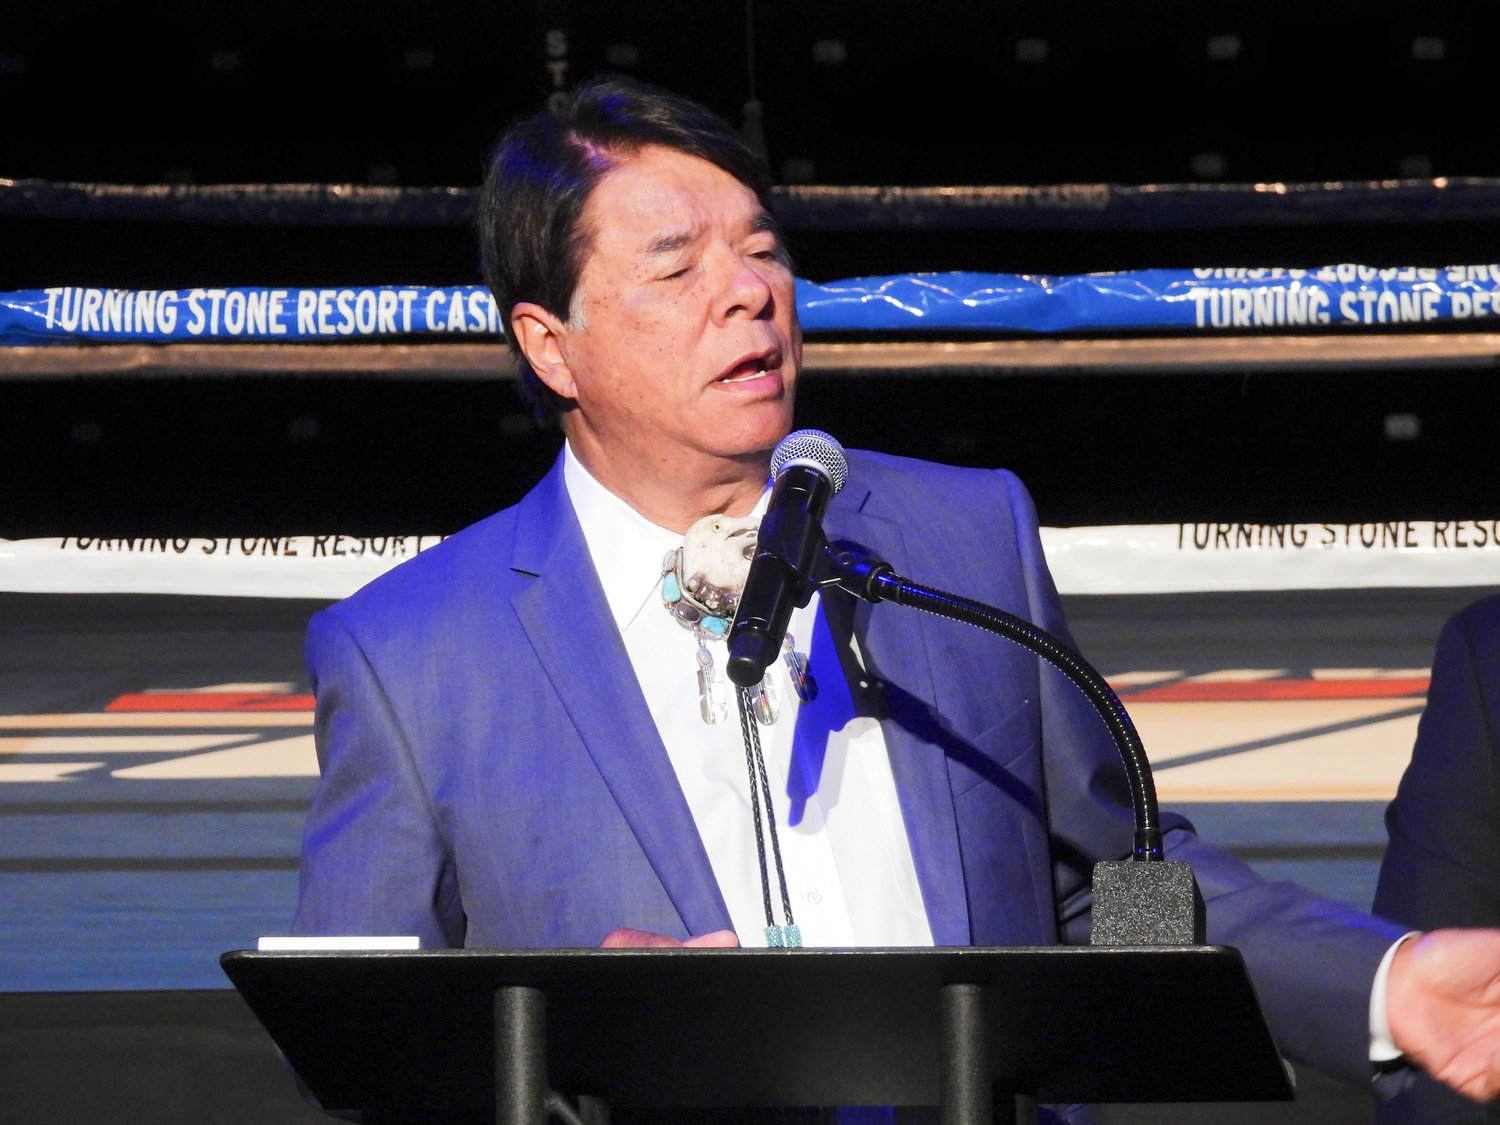 Oneida Nation Representative and Nation Enterprises CEO Ray Halbritter speaks at a press conference on Thursday at the Turning Stone, kicking off the Boxing Hall of Fame Induction Weekend